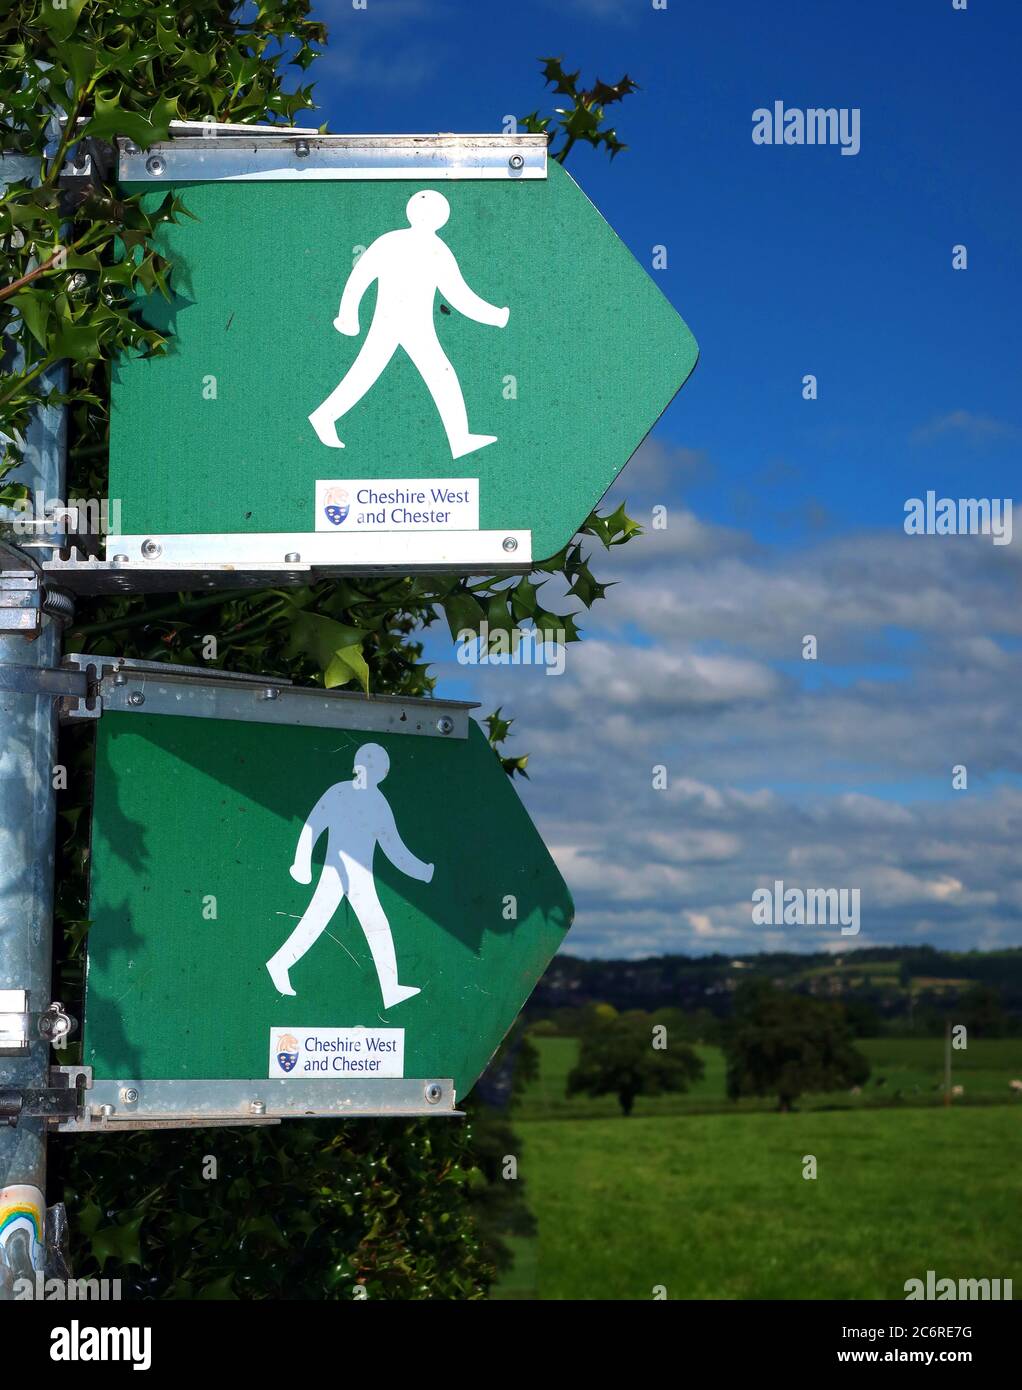 Cheshire West and Chester,CWAC,public footpath signs,Cheshire countryside,right of way,England,UK,leisure and culture Stock Photo